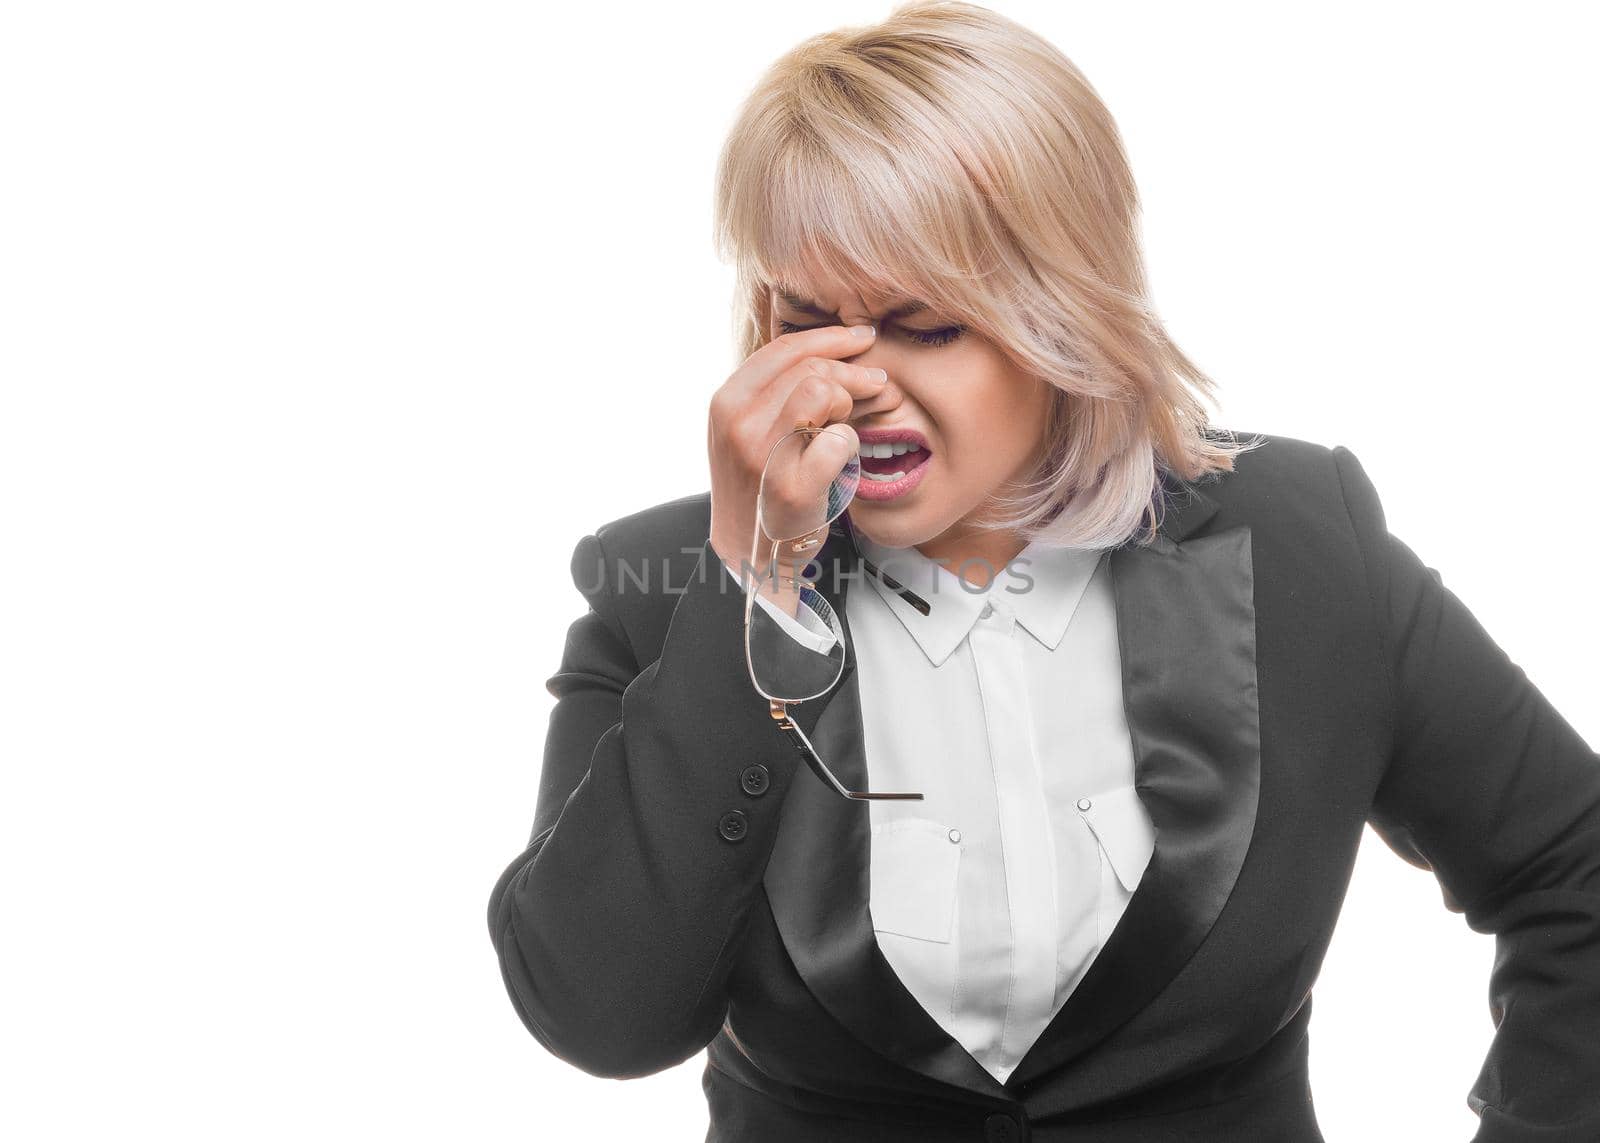 Woman having headache. Isolated on white background. Businesswoman standing with pain isolated on studio background. Female half-length portrait. Human emotions, facial expression concept.